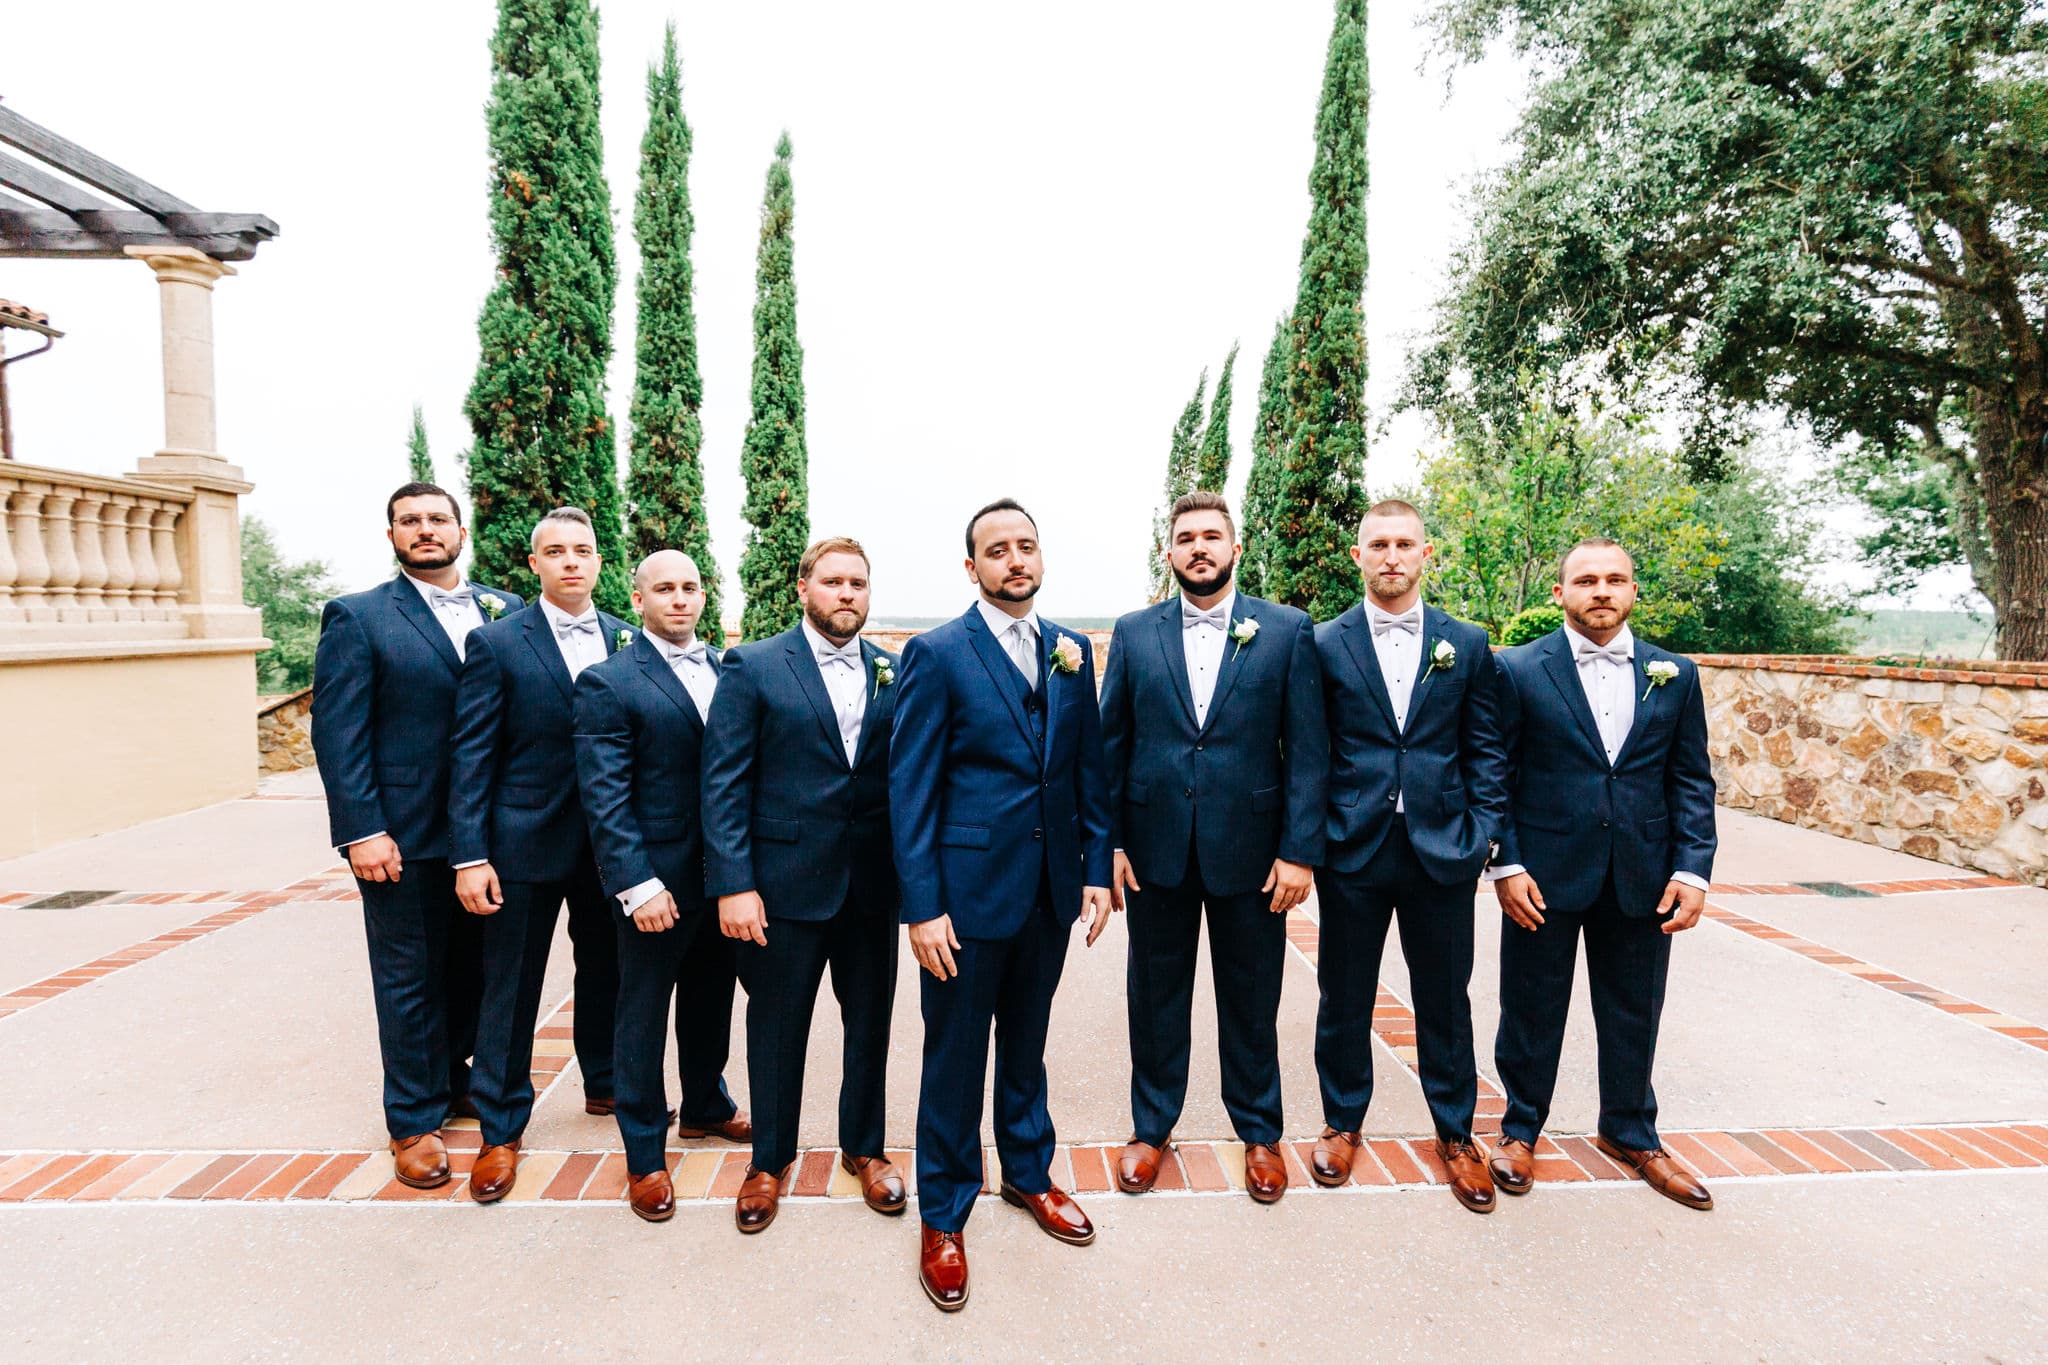 groomsmen in navy tuxes standing together for groomsmen pictures in front of infinity pool at Bella collina